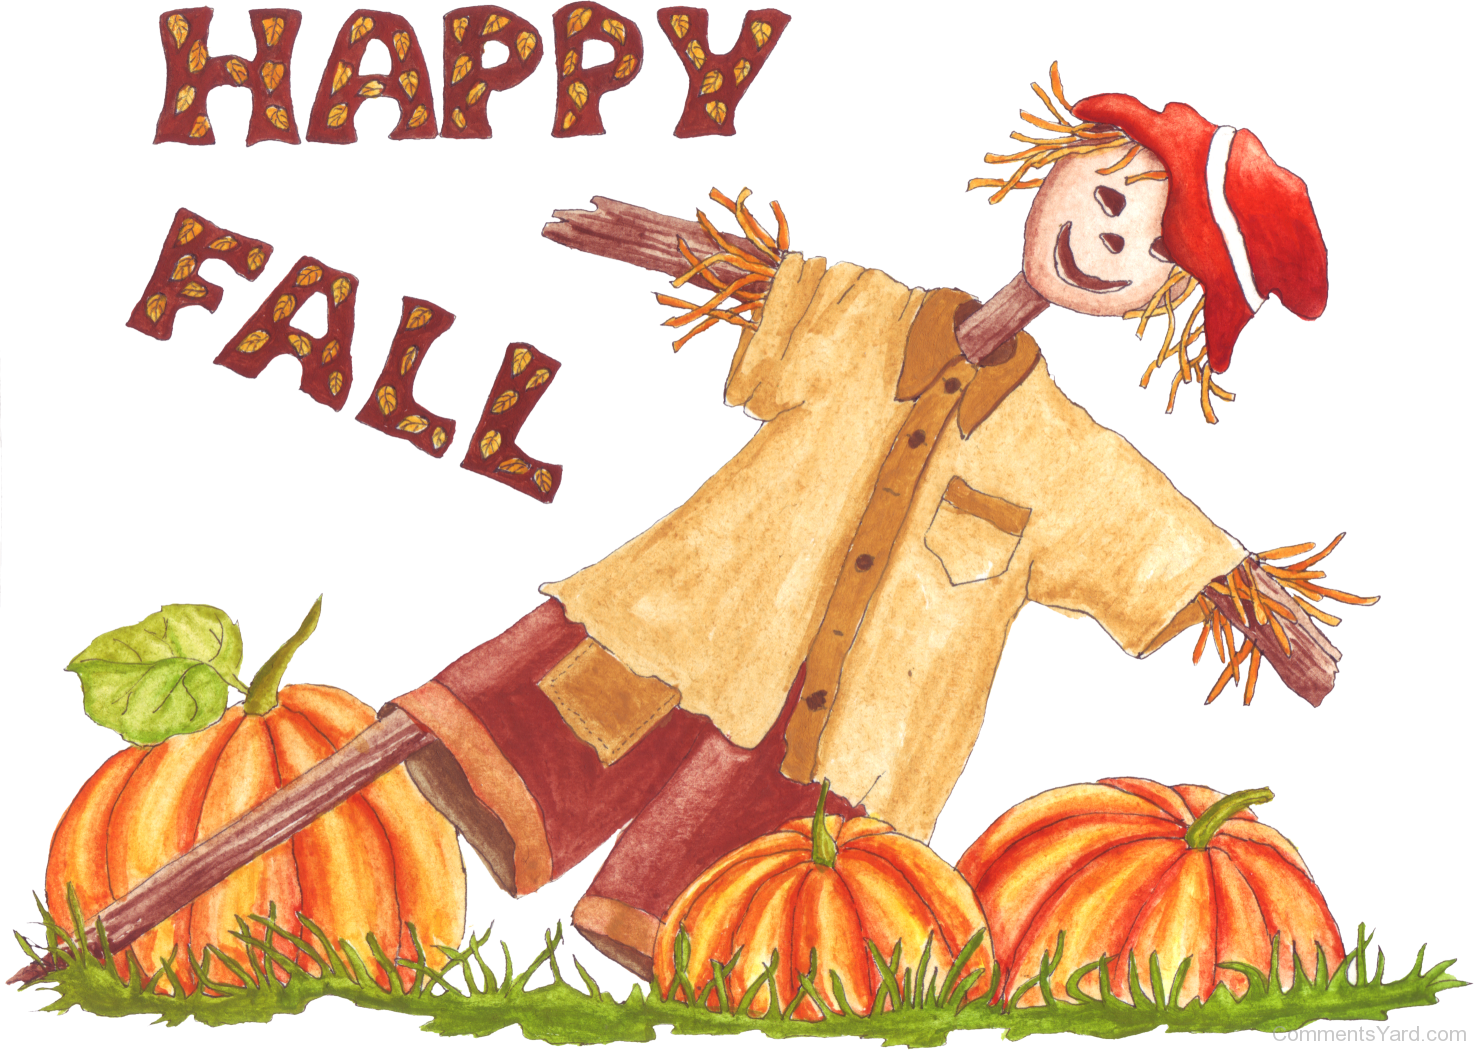 Falling is here and. Clipart happy pencil